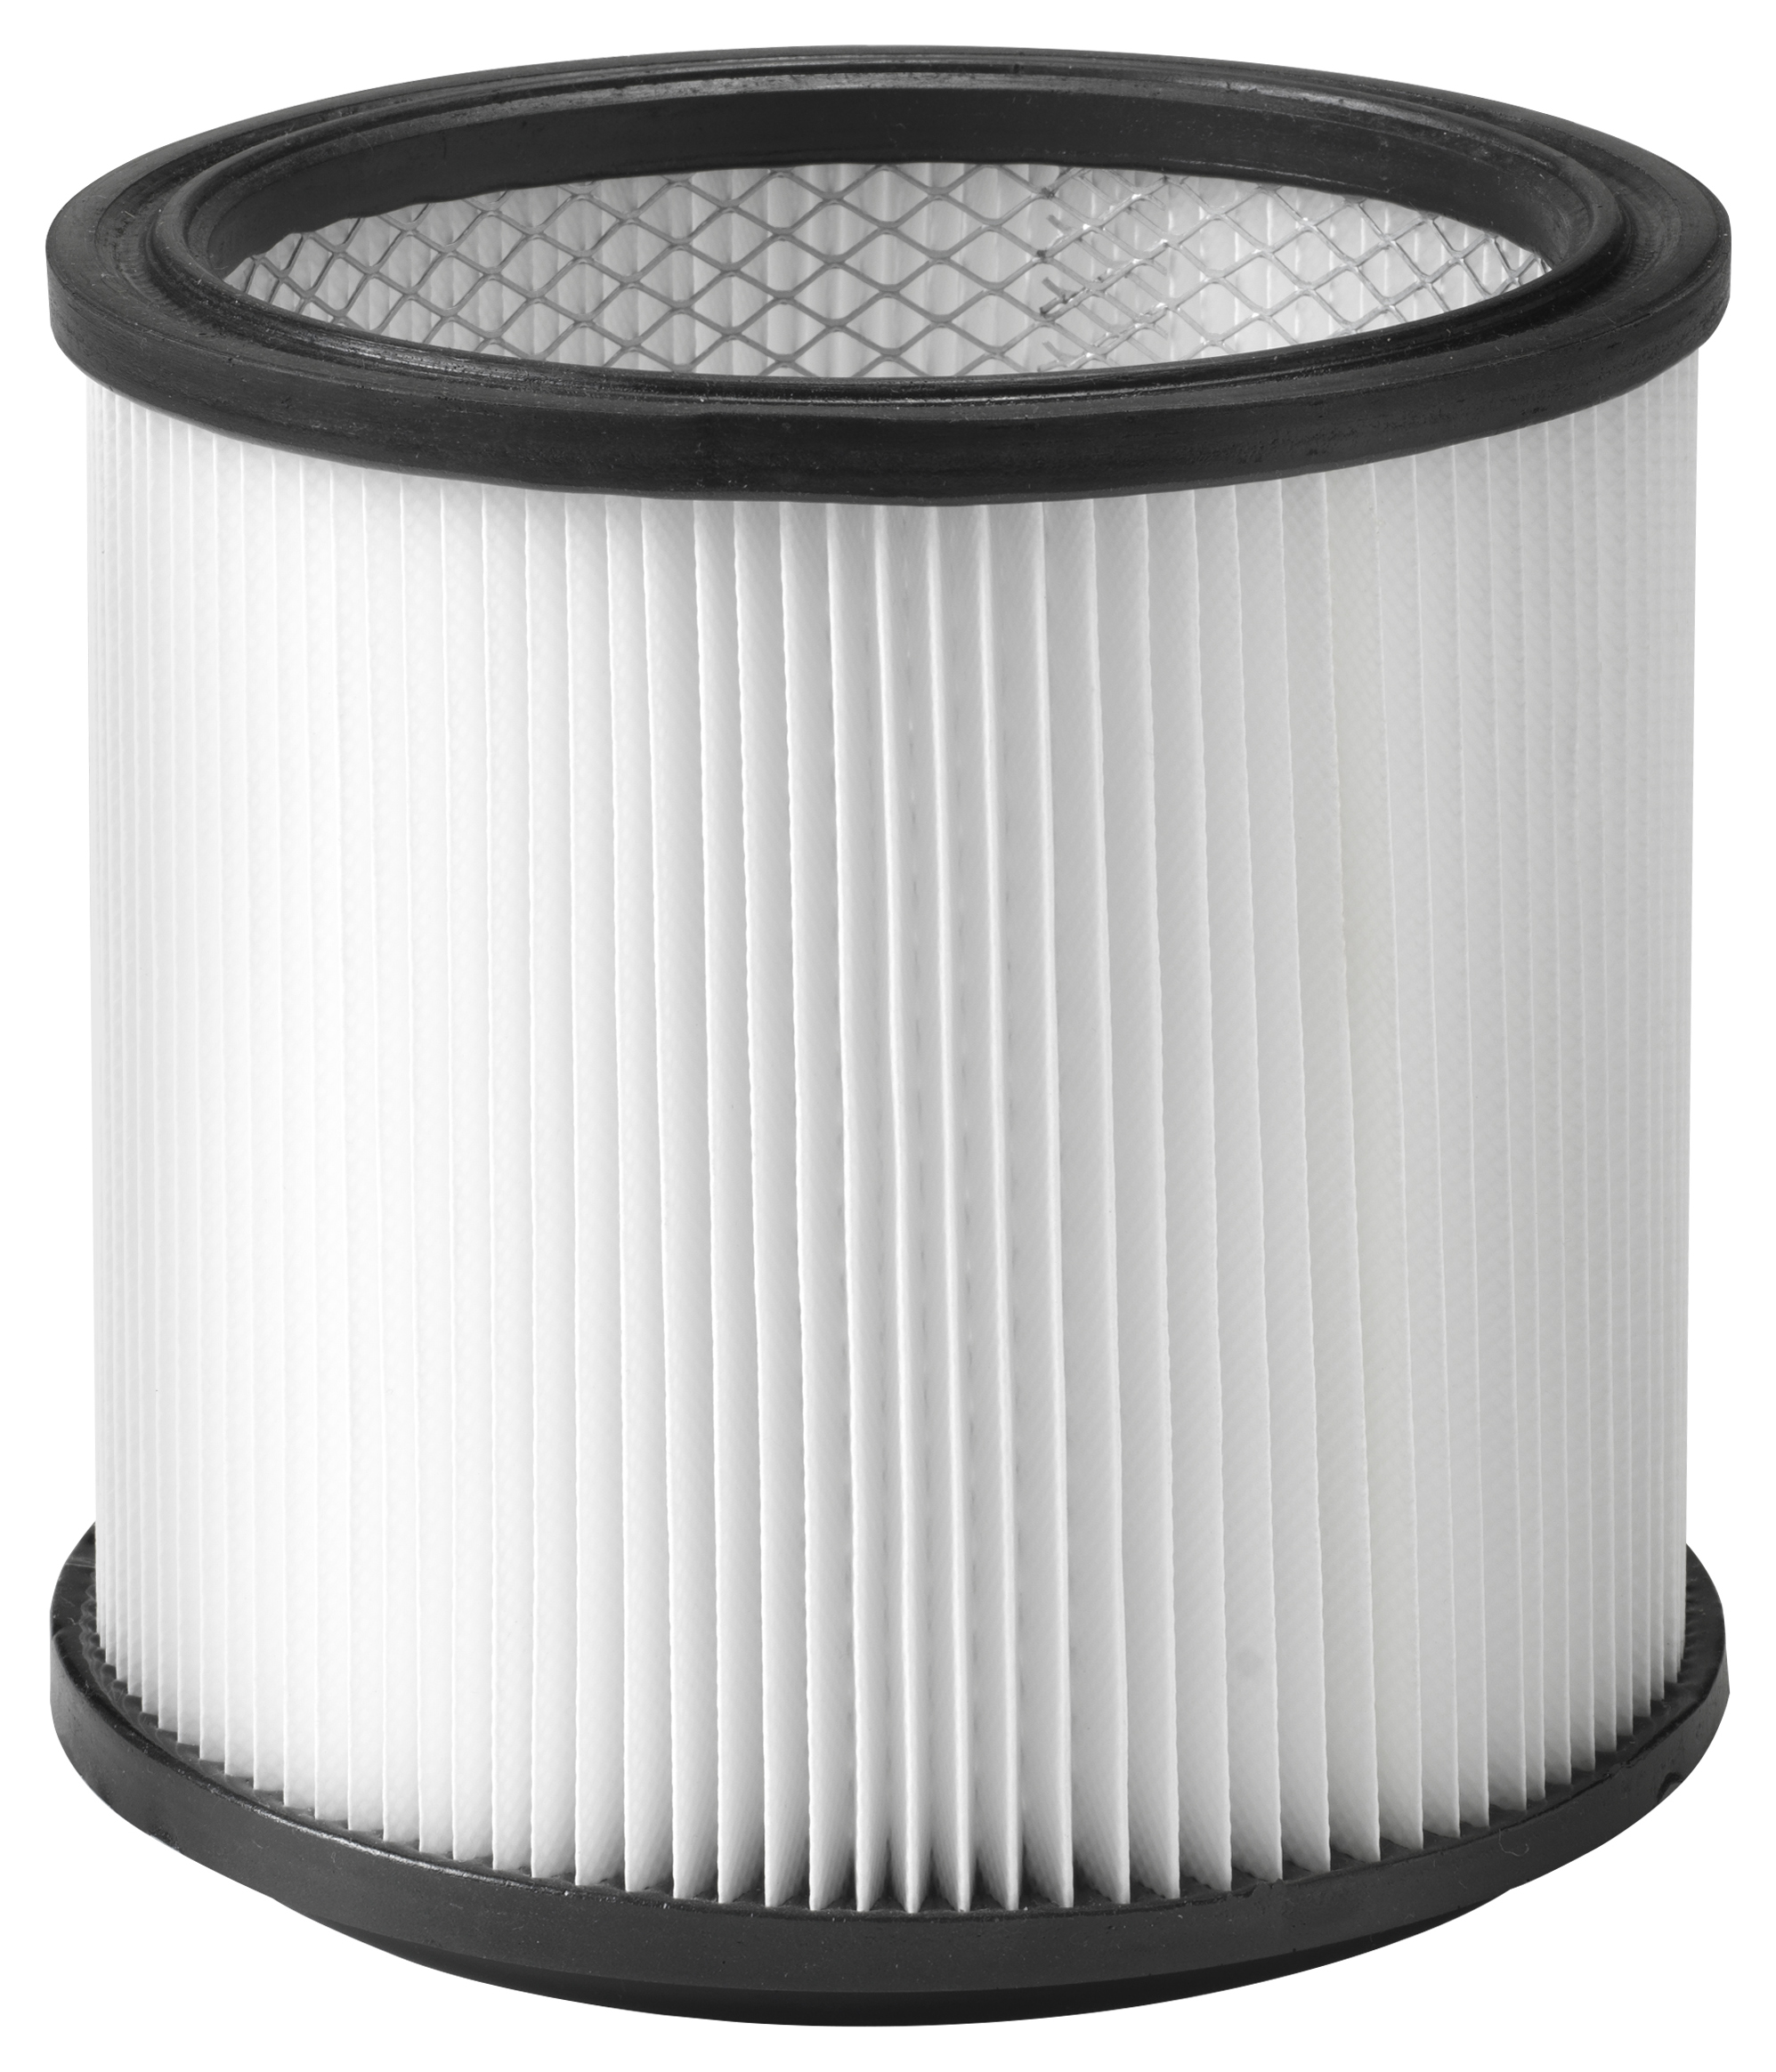 Image of Vacmaster 951333 Universal Washable Wet & Dry Cartridge Filter 15L - 60L